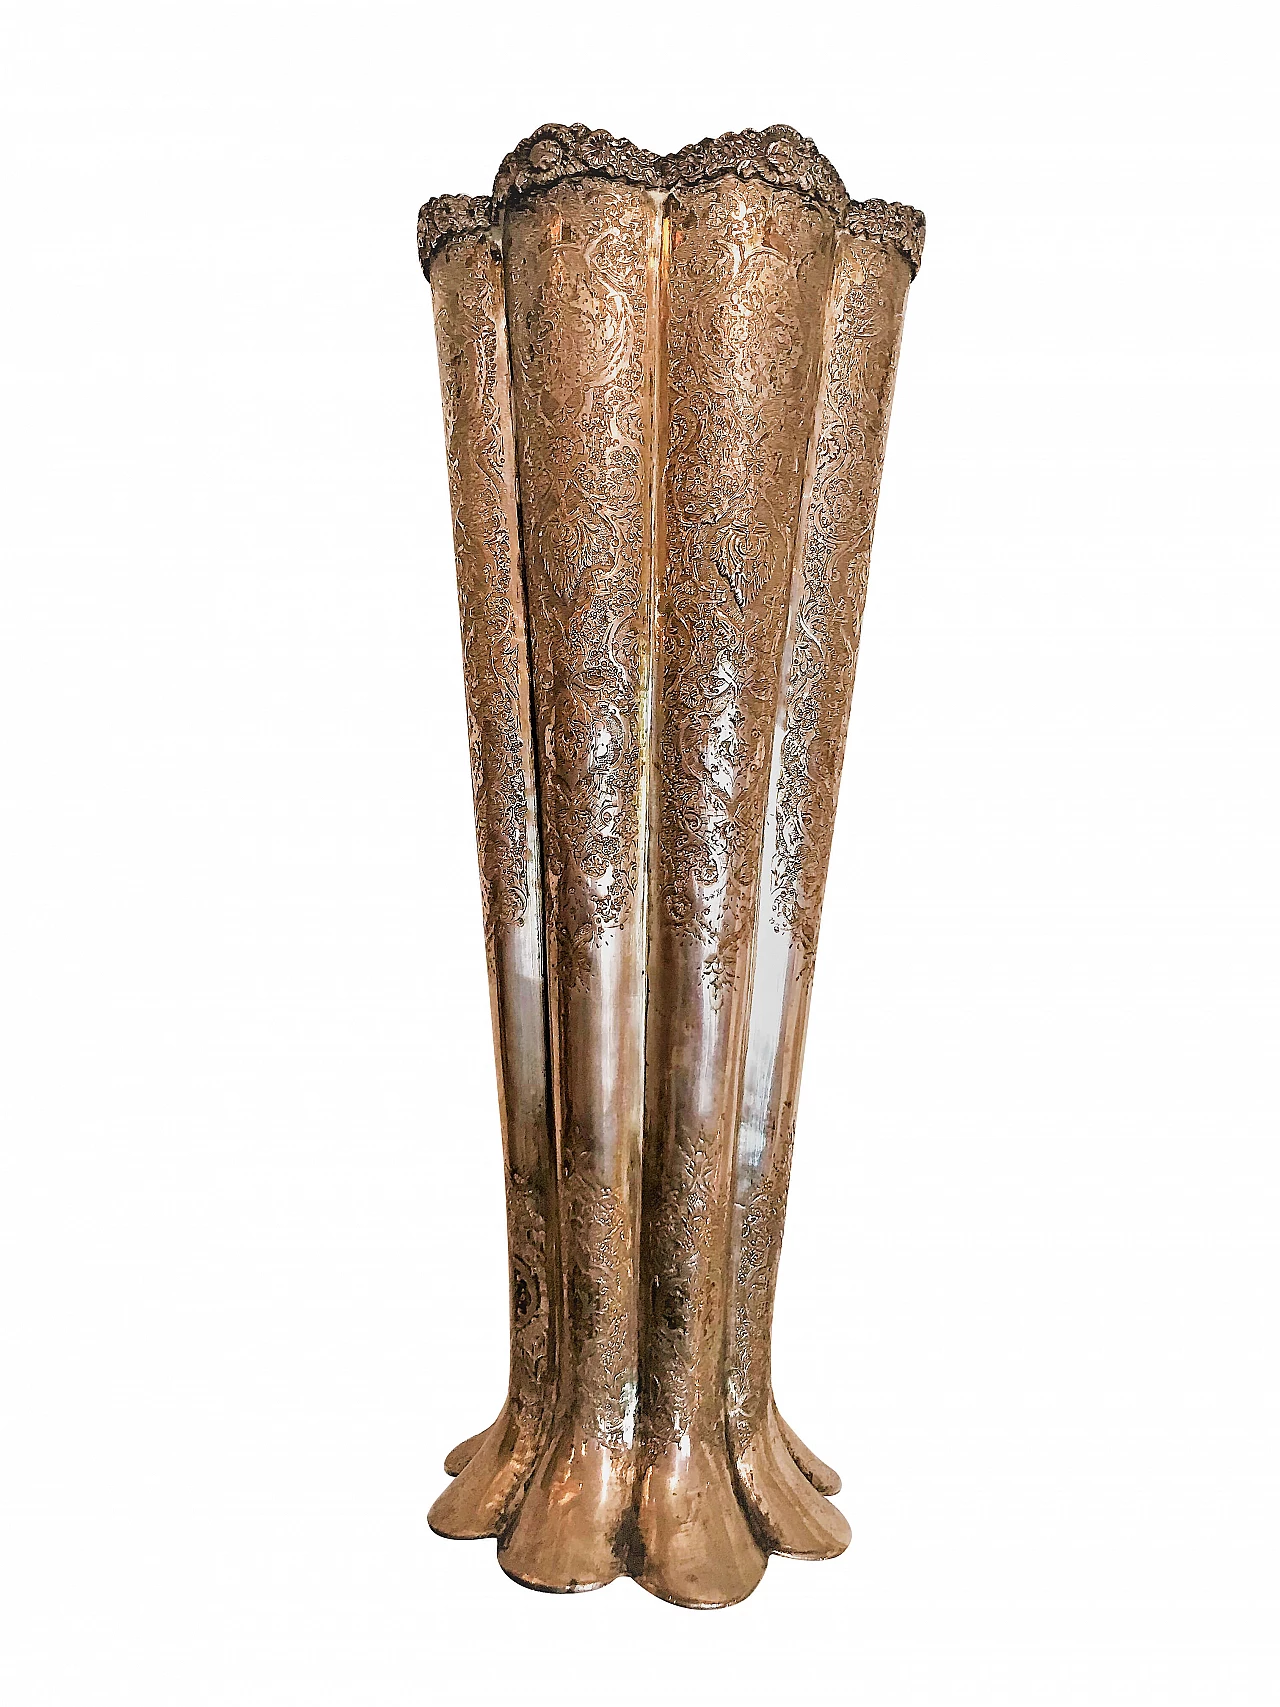 High flower shaped vase in chiseled silver, Russia, 19th century 1076424